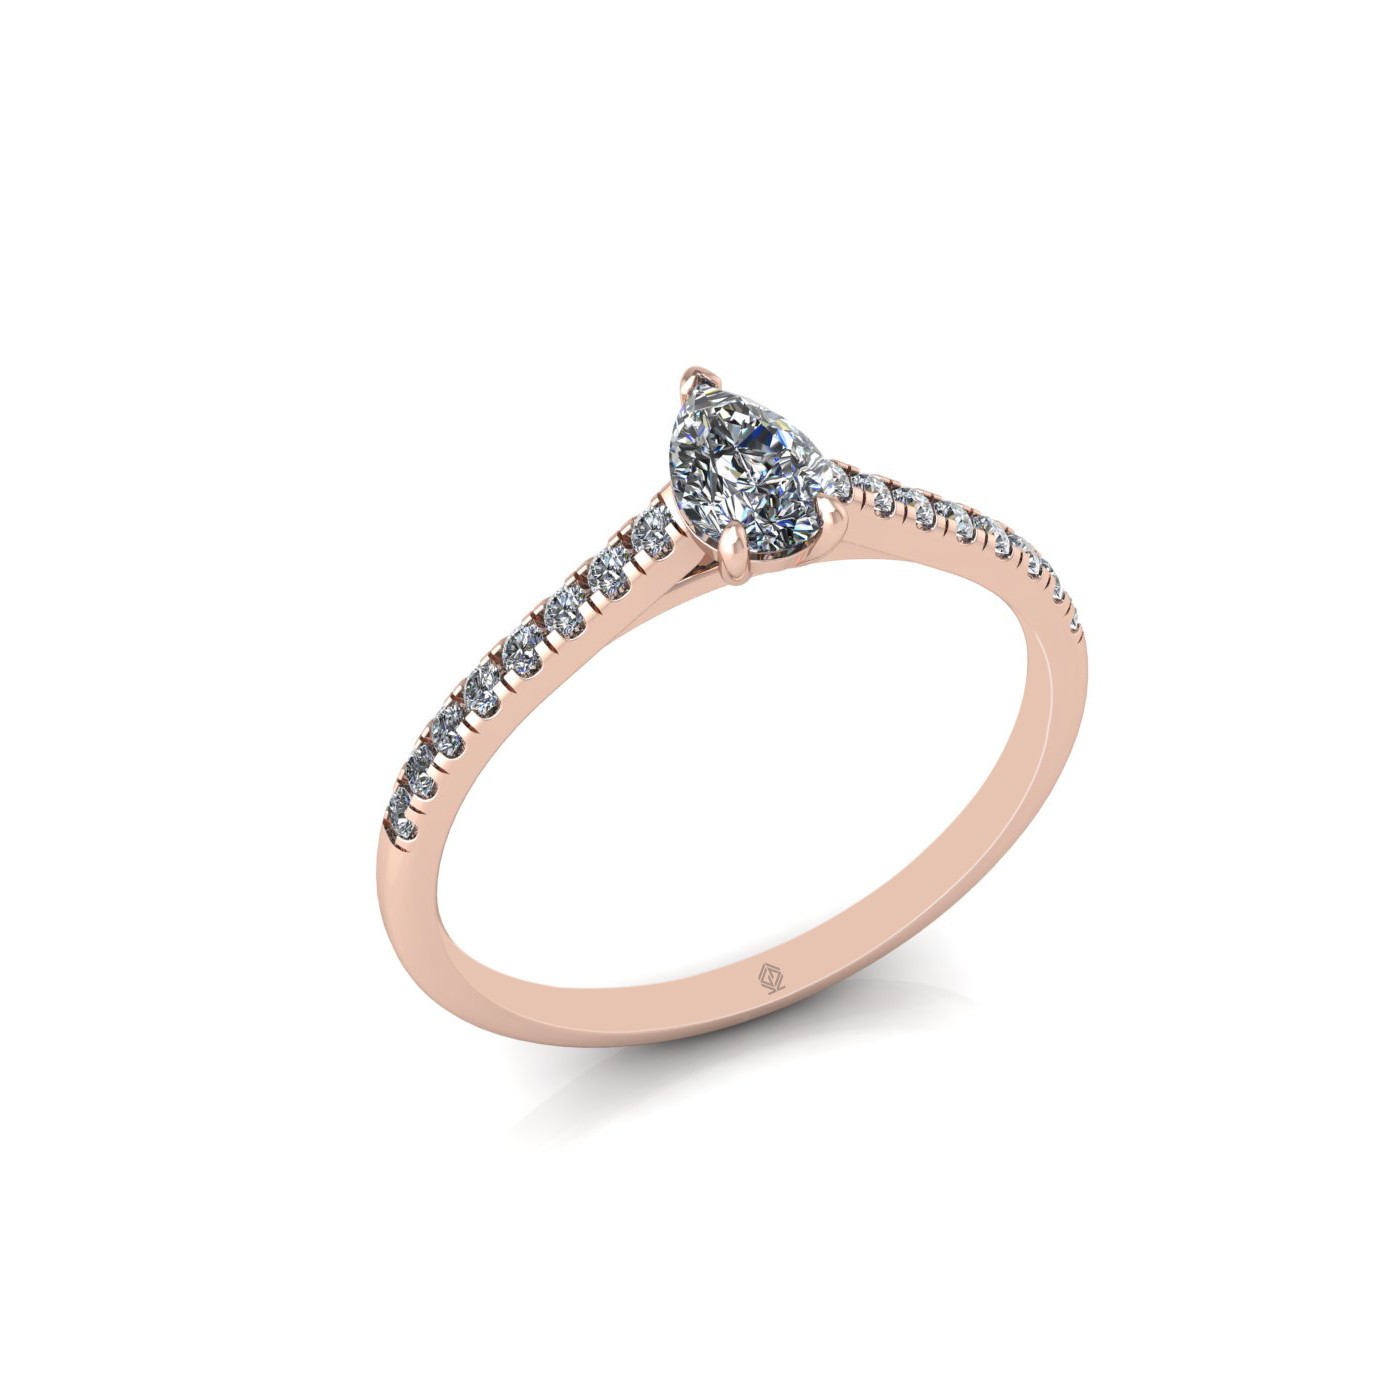 18k rose gold  0,30 ct 3 prongs pear diamond engagement ring with whisper thin pavÉ set band